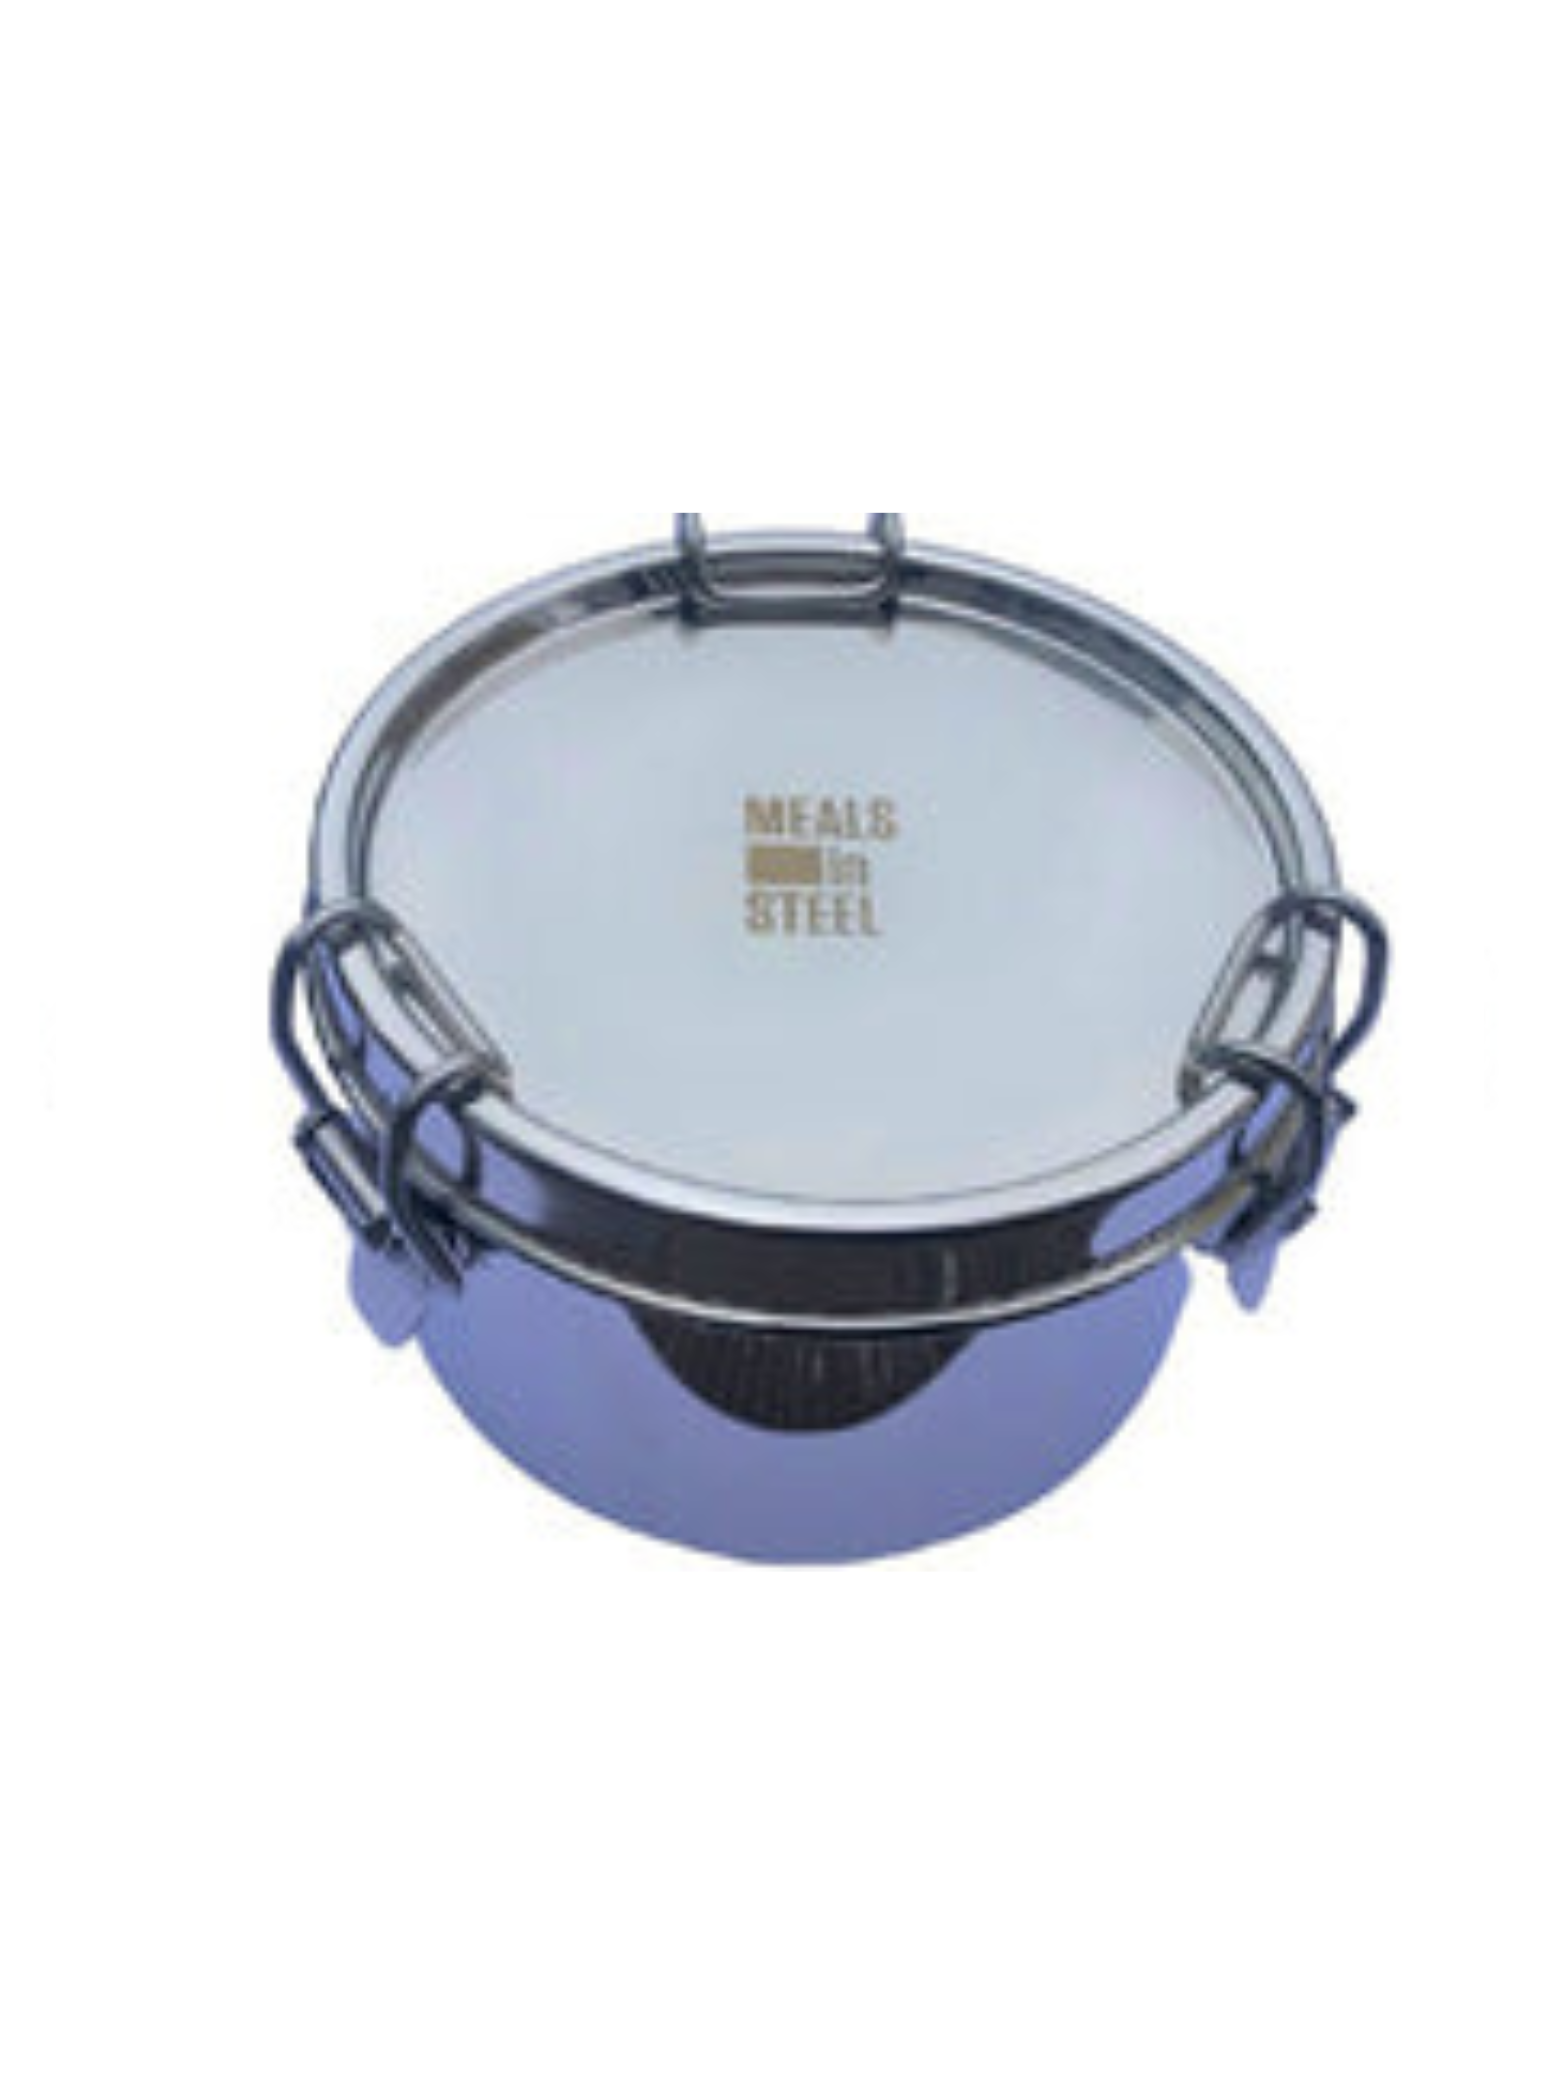 Meals in Steel Round Leakproof Lunchbox